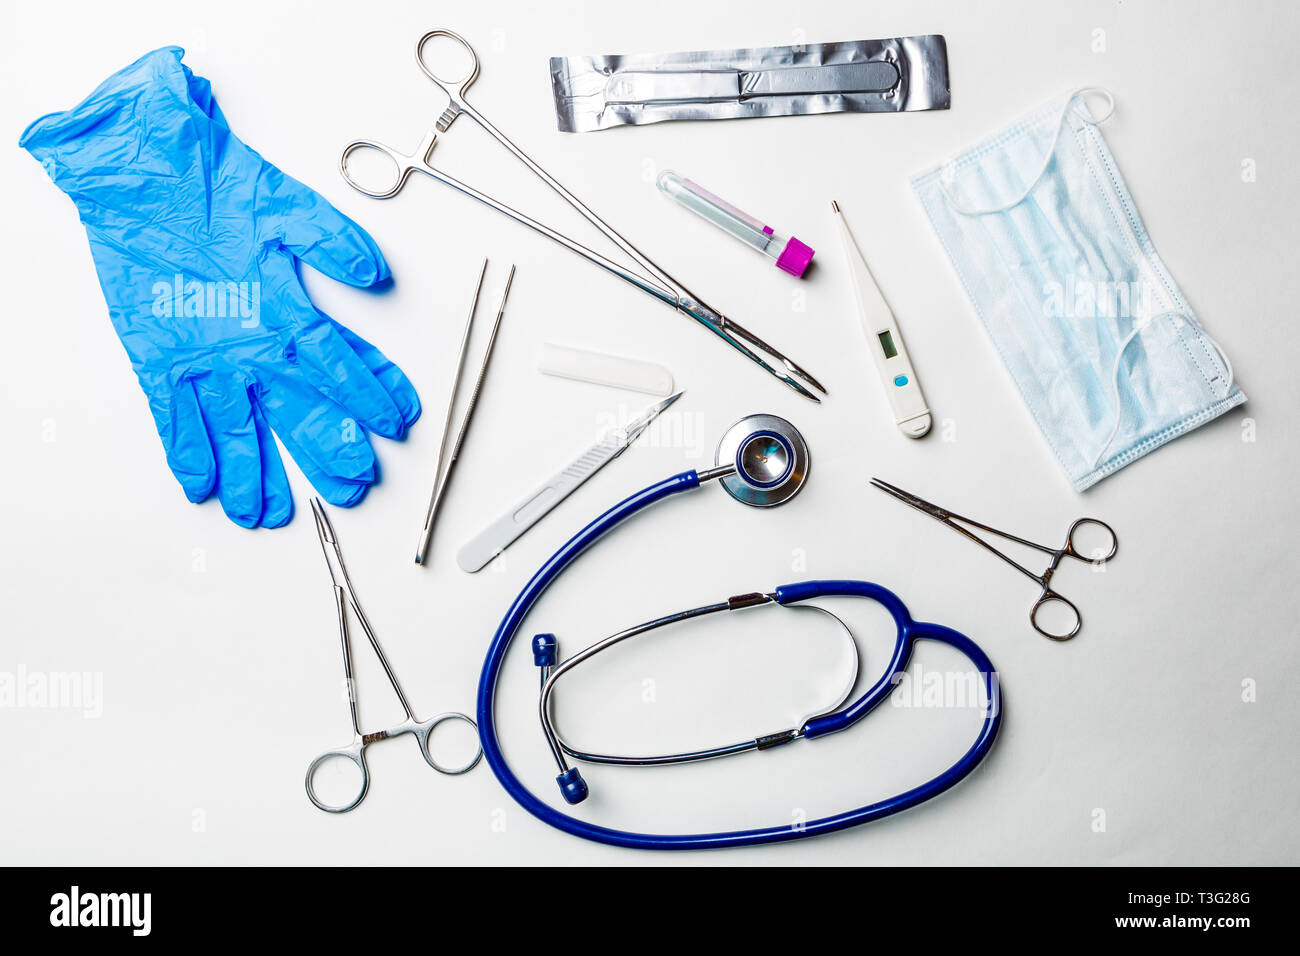 Doctor tools on blue surface Stock Photo - Alamy